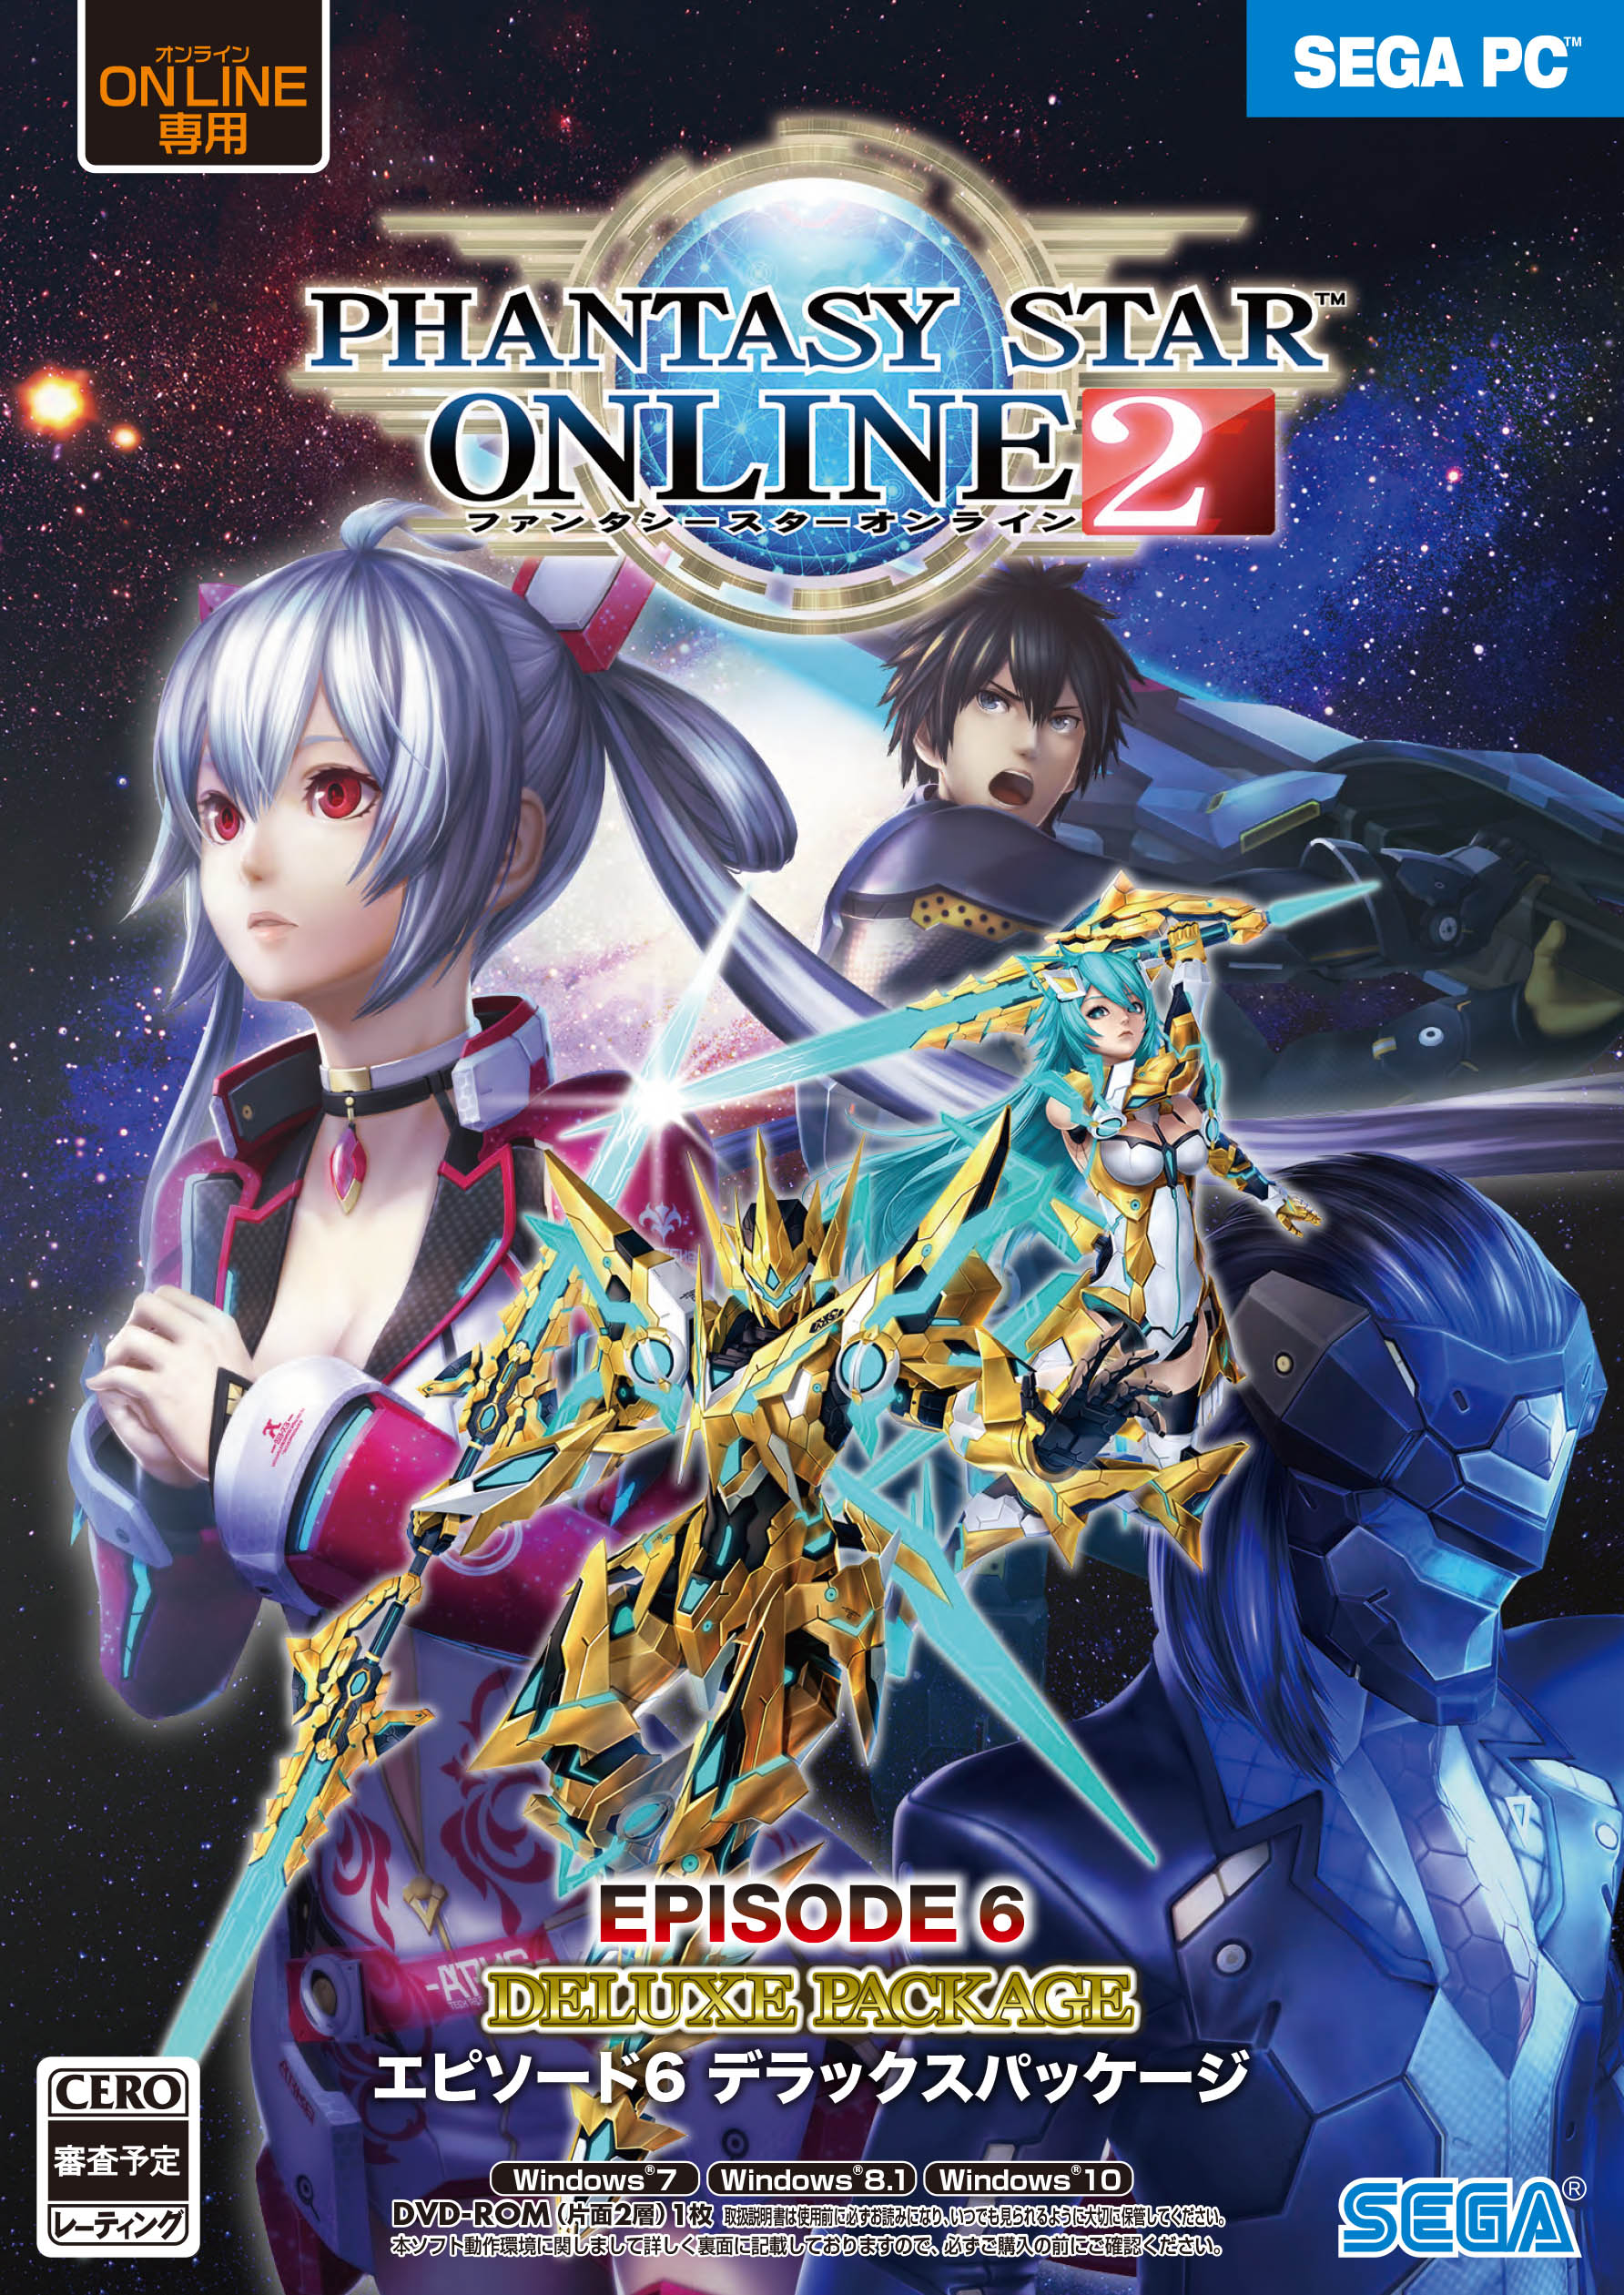 Phantasy Star Online 2 Episode 6 Deluxe Package For Ps4 Switch